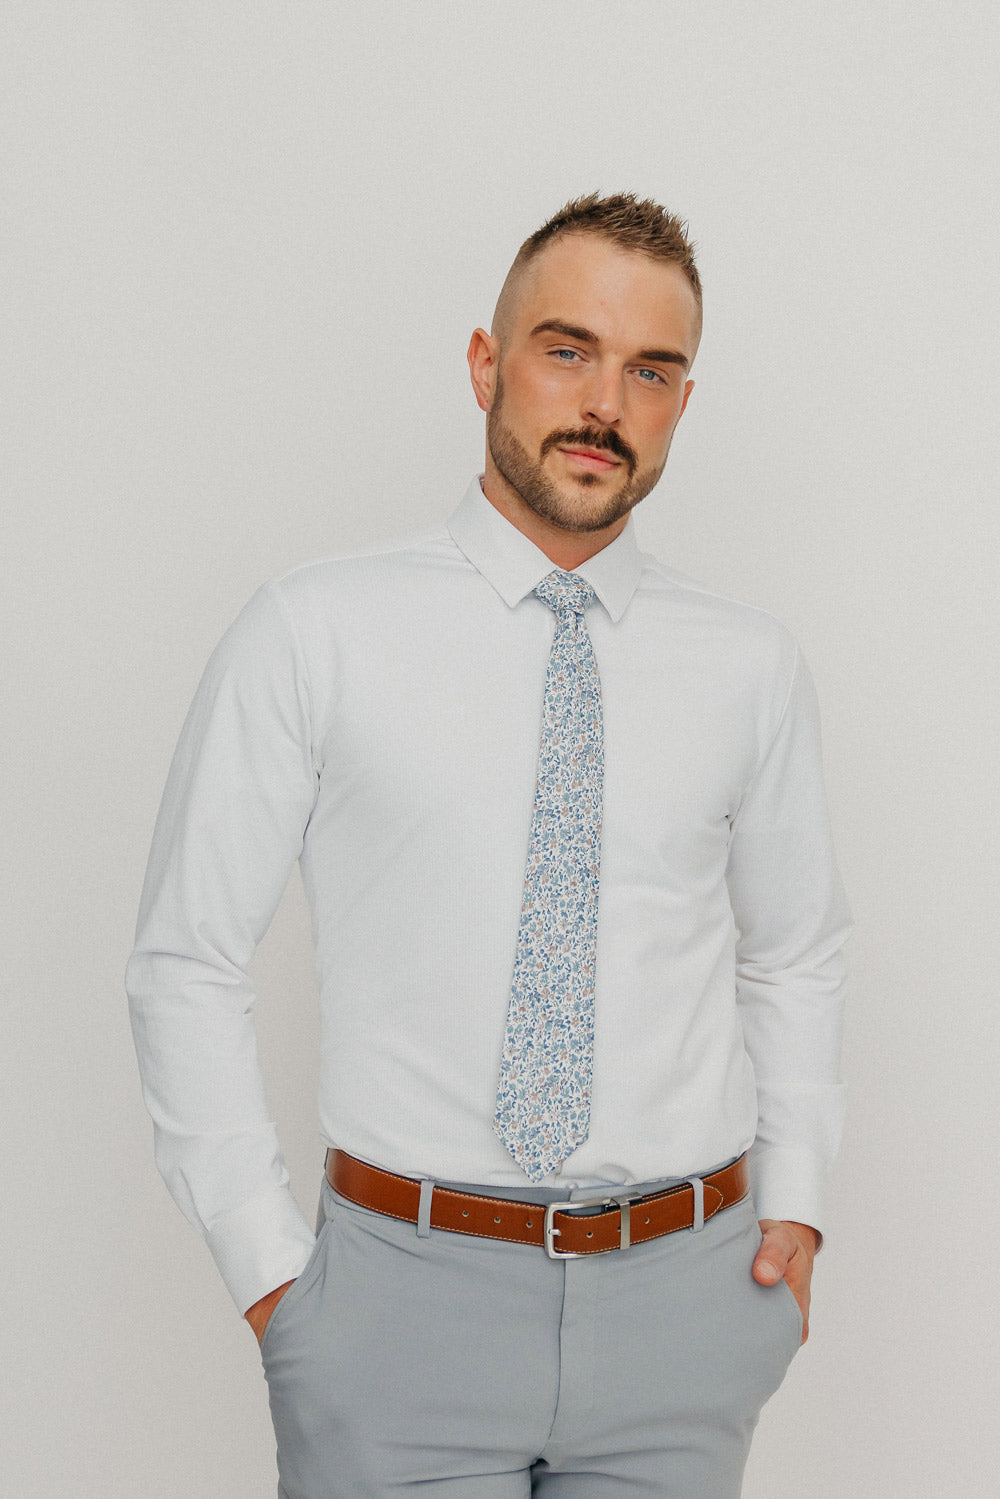 Scorpion Grass tie worn with a white shirt, brown belt and gray pants.